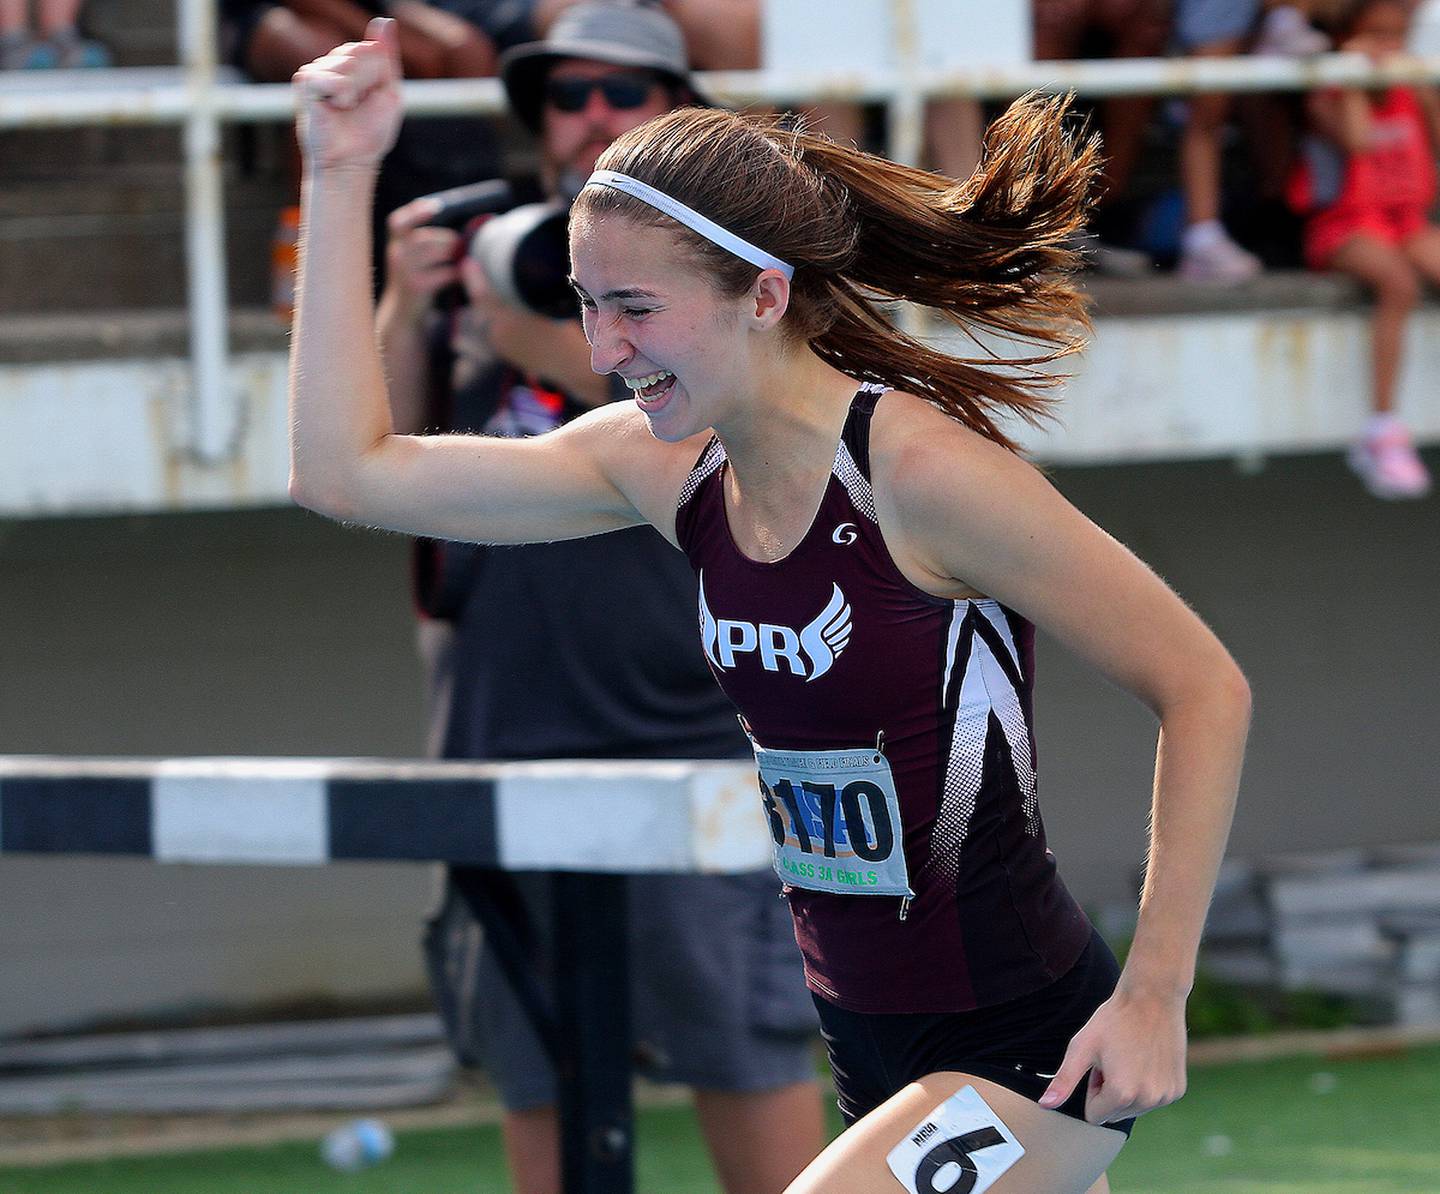 Prairie Ridge's Rylee Lydon celebrates as she crosses the finish line in the Class 3A 400-meter dash June 12, 2021 at the IHSA Track & Field State Finals.